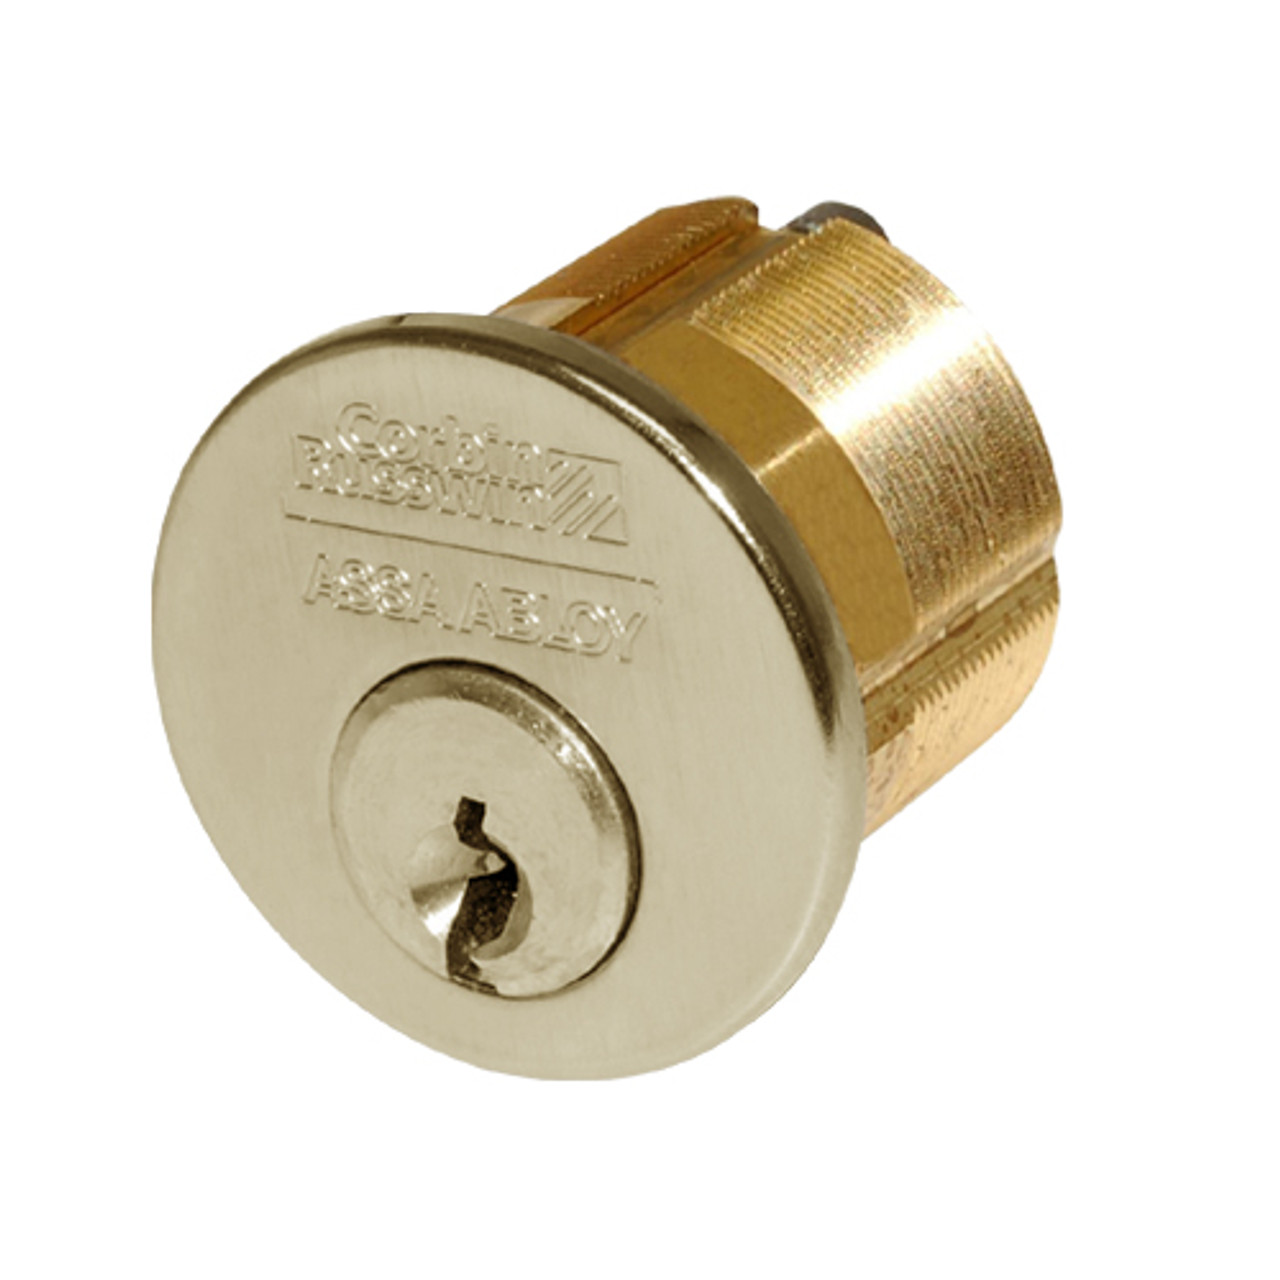 CR1000-200-A01-6-59A1-606 Corbin Conventional Mortise Cylinder for Mortise Lock and DL3000 Deadlocks with Cloverleaf Cam in Satin Brass Finish